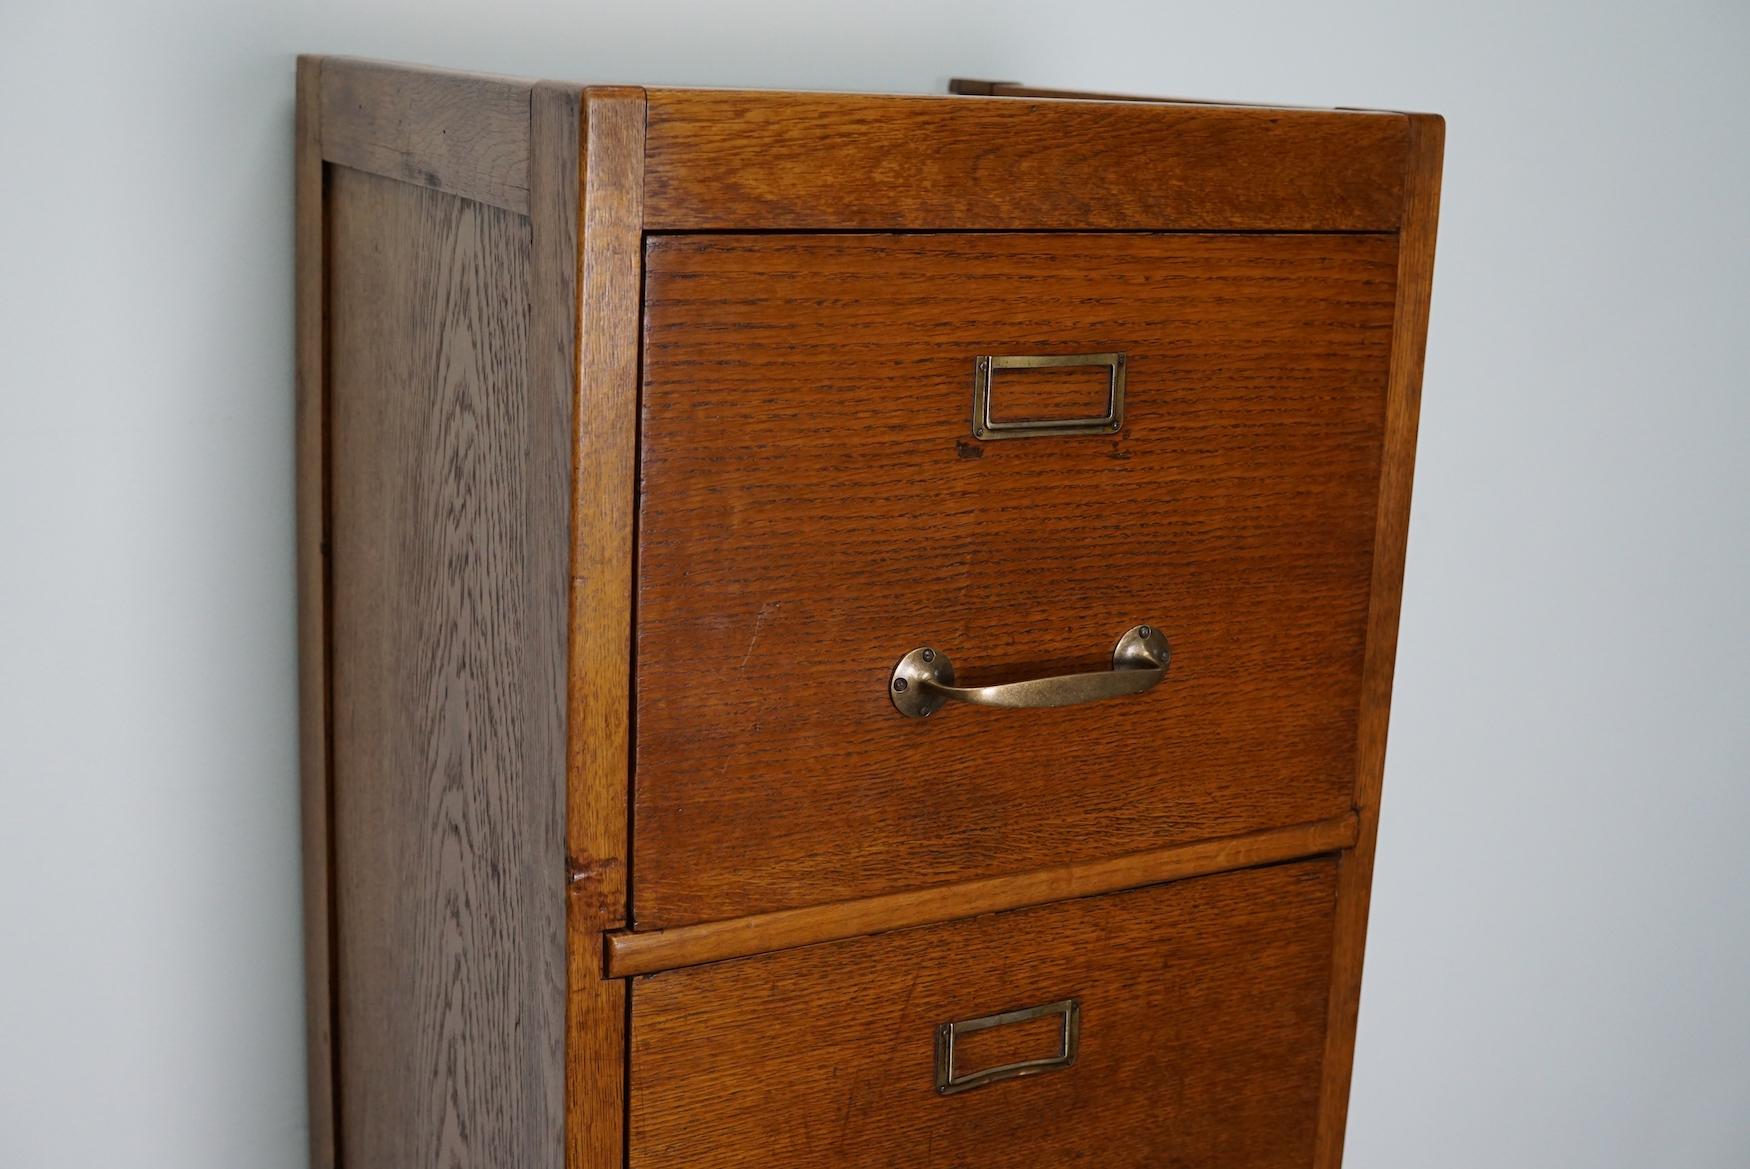 This oak filing cabinet with brass hardware was made in the early 20th century in France. It was very well made and it remains in a good antique condition. The interior dimension of the drawers are: D W H 35 x 38 x 10 / 28 cm.